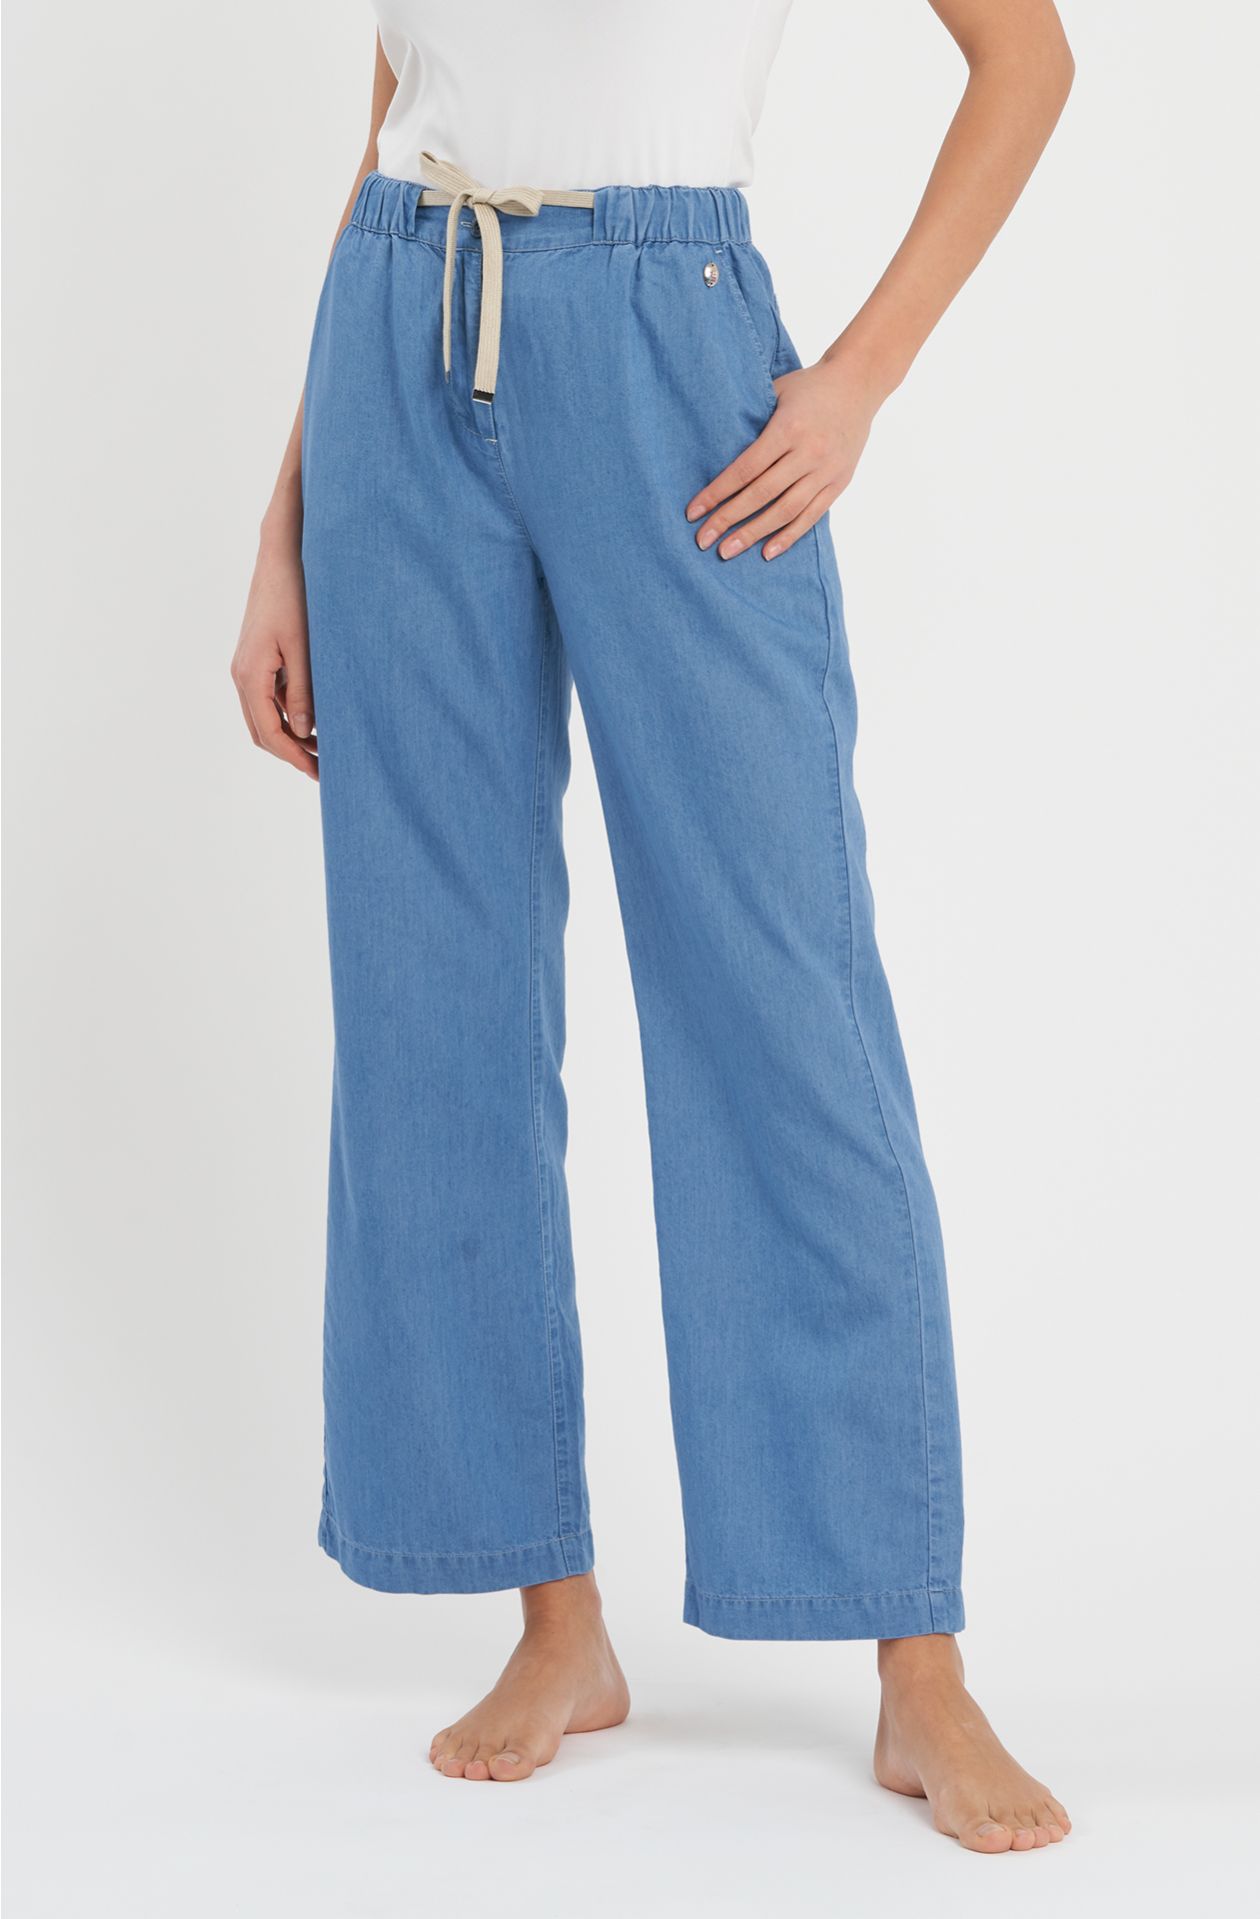 Lightweight chambray trousers